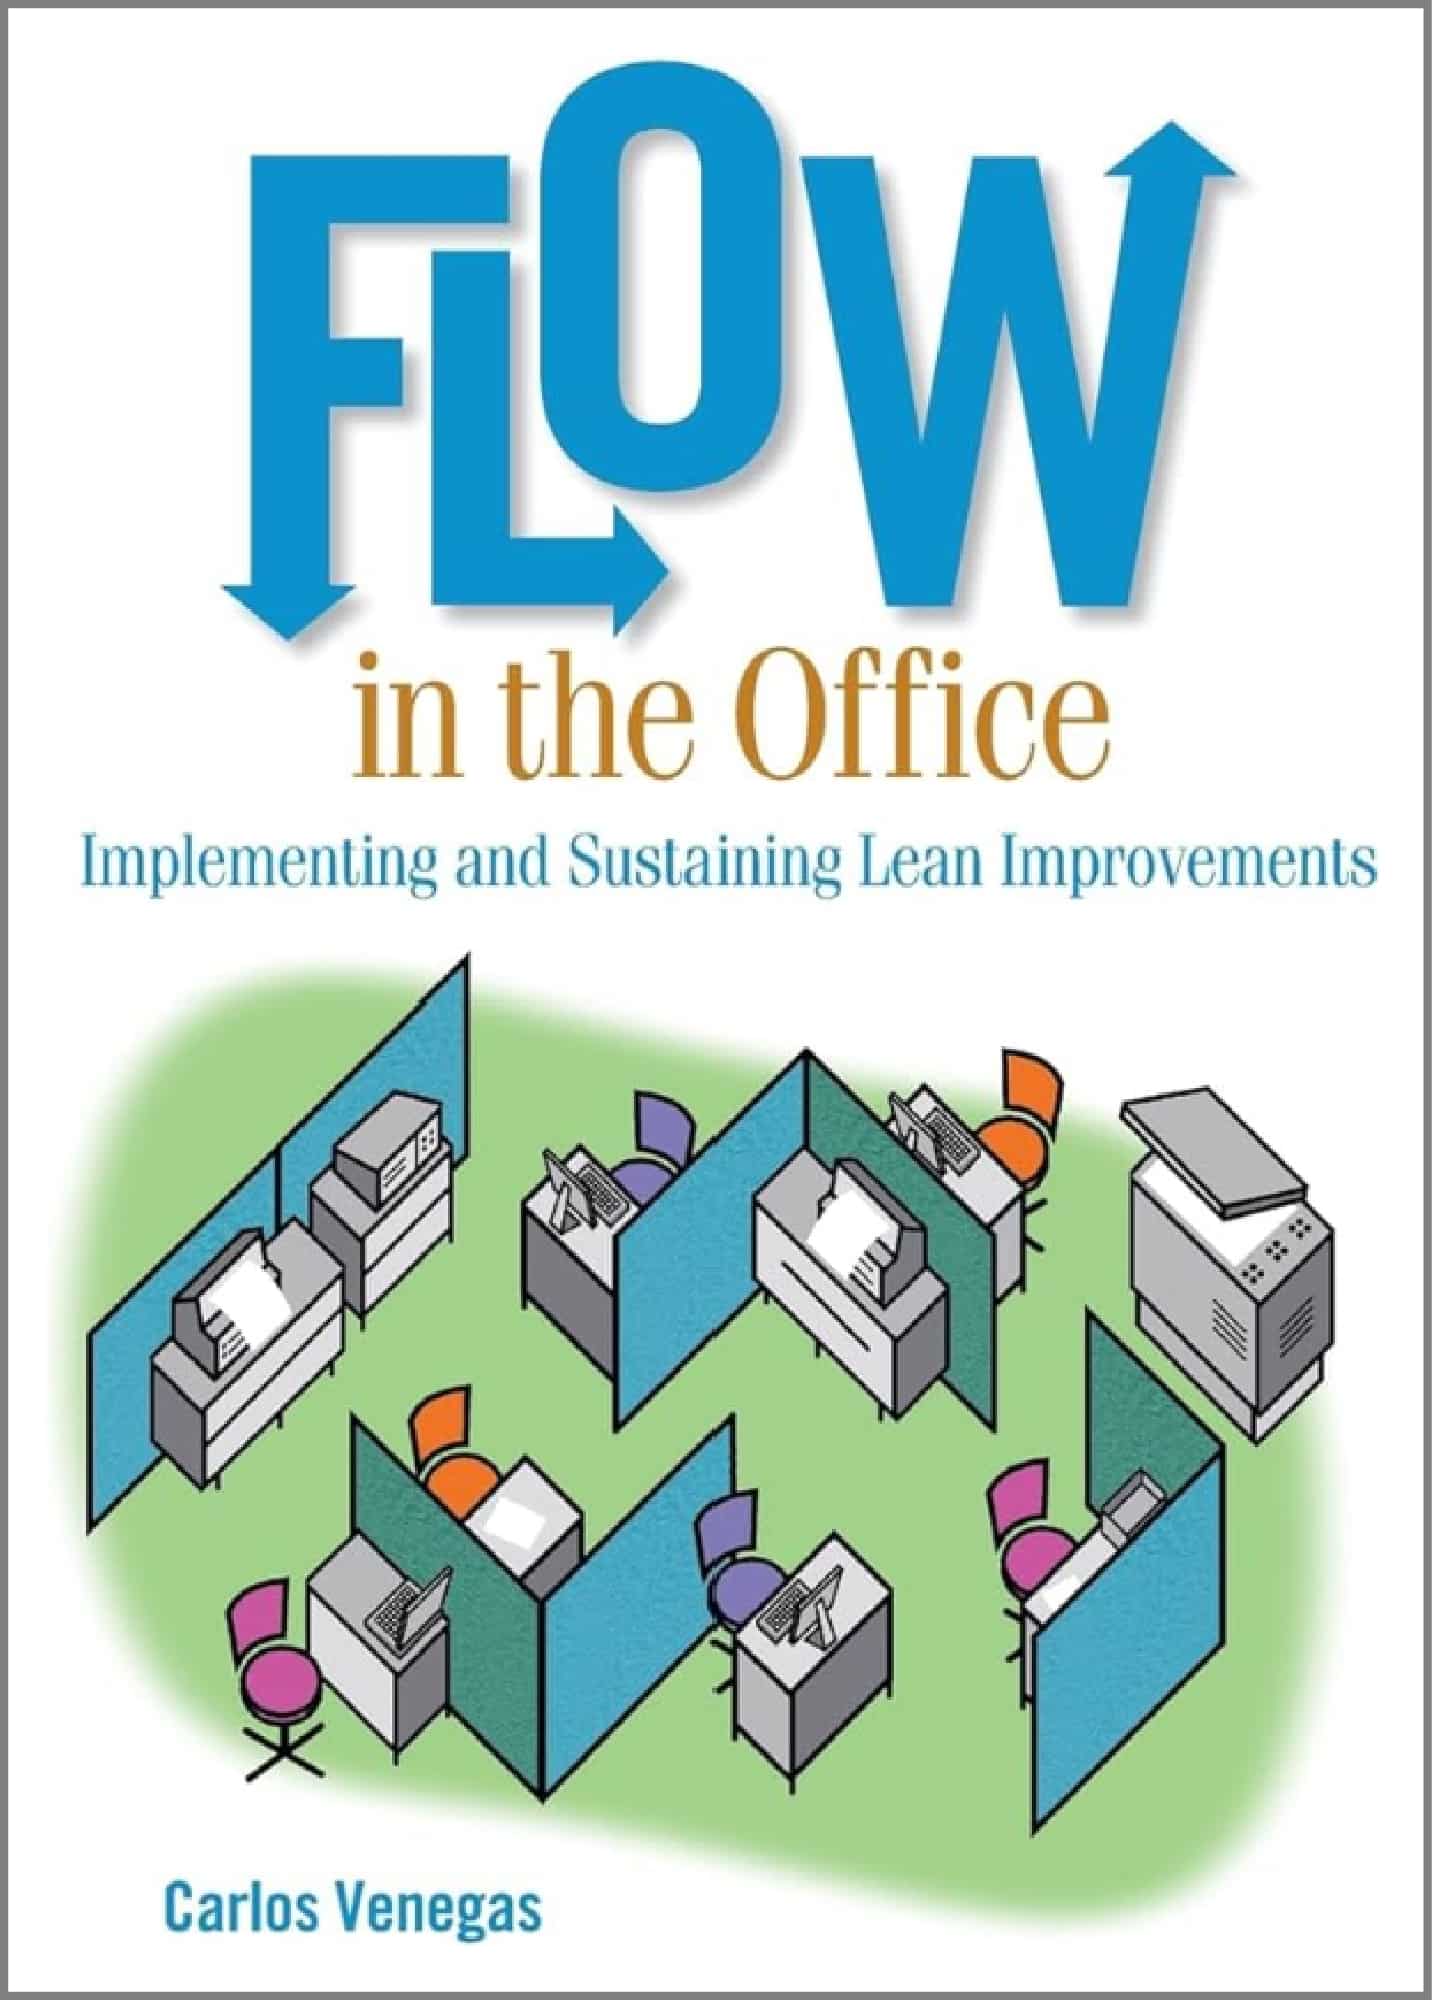 Cover of book for Flow in the Office: Implementing and Sustaining Lean Improvements